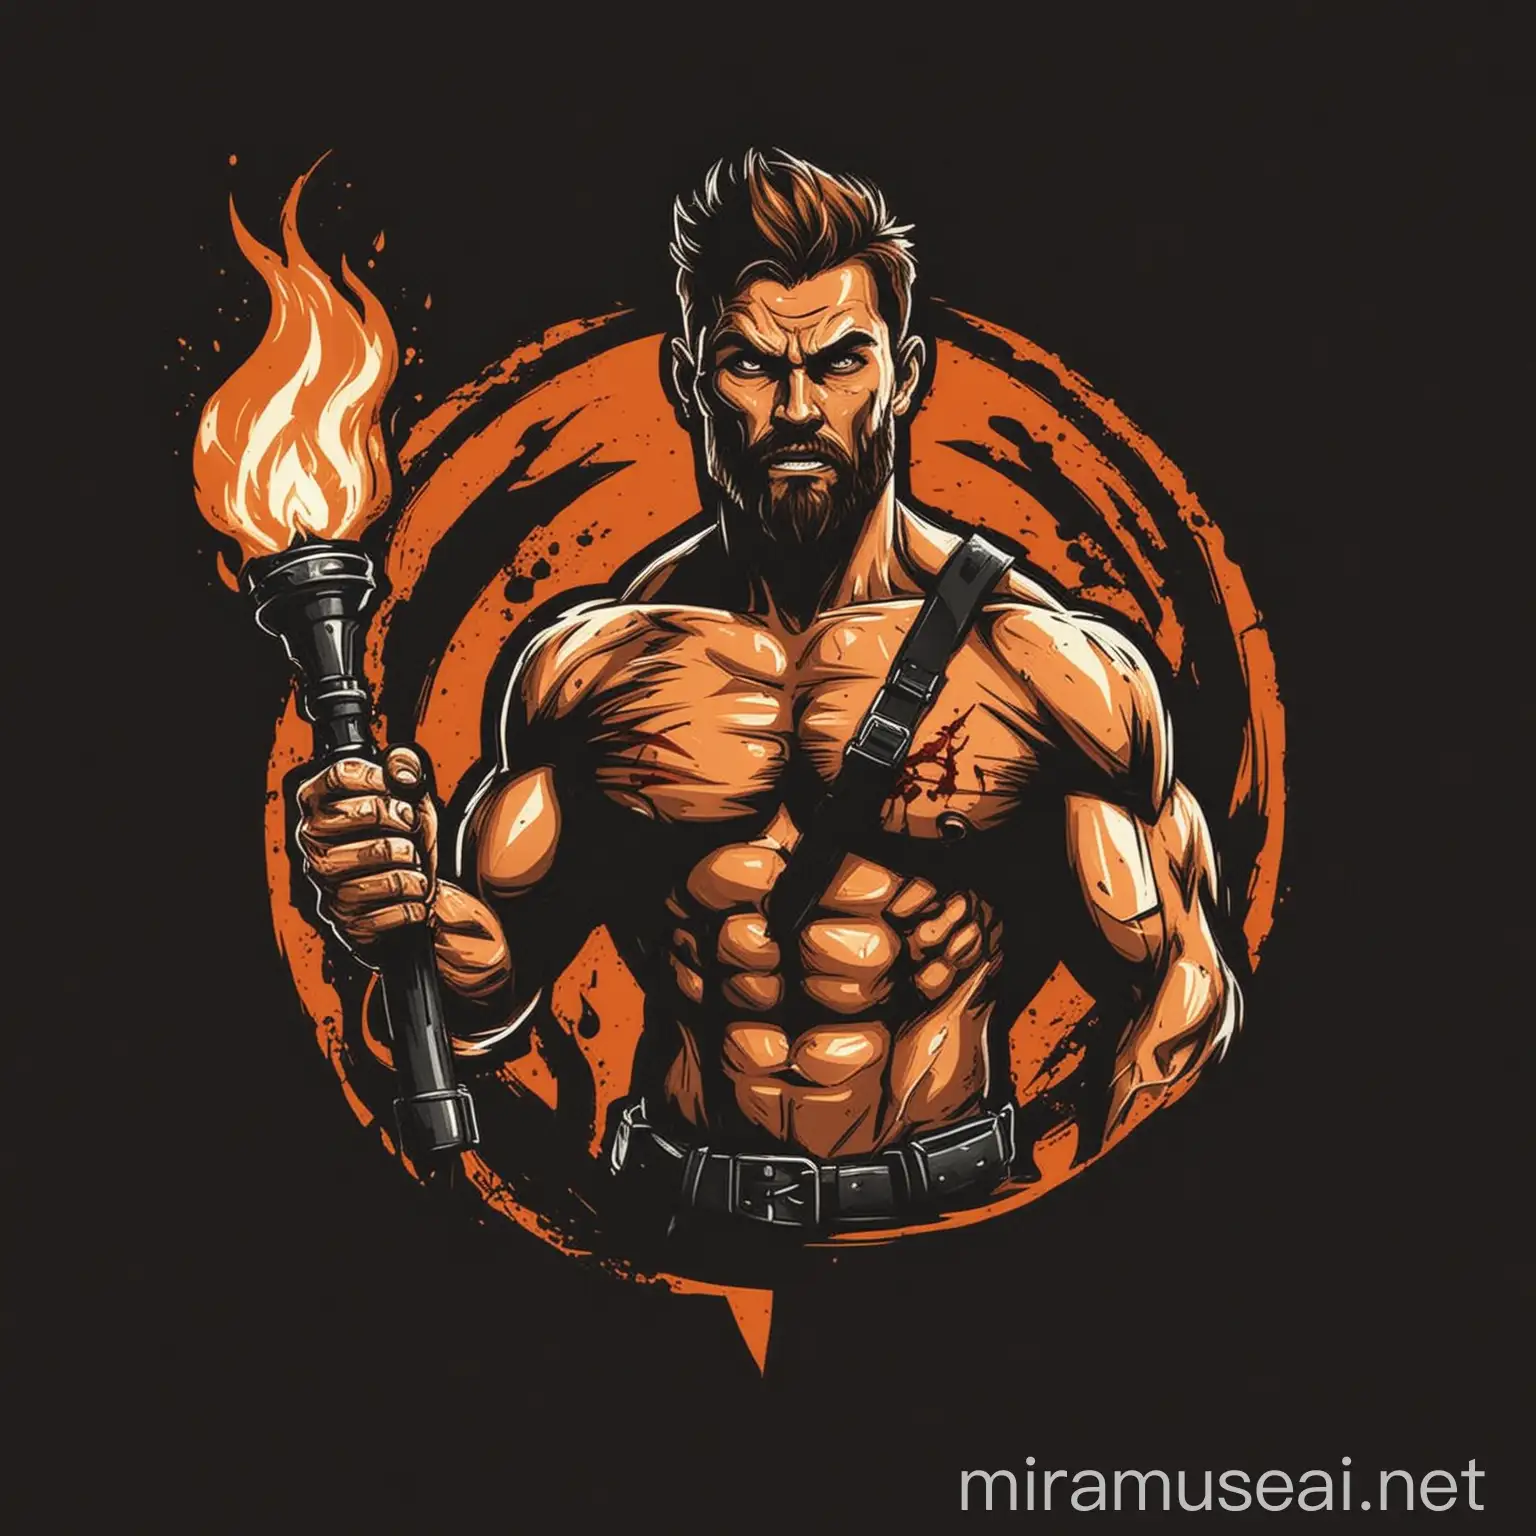 Dominant Man Logo Holding a Torch